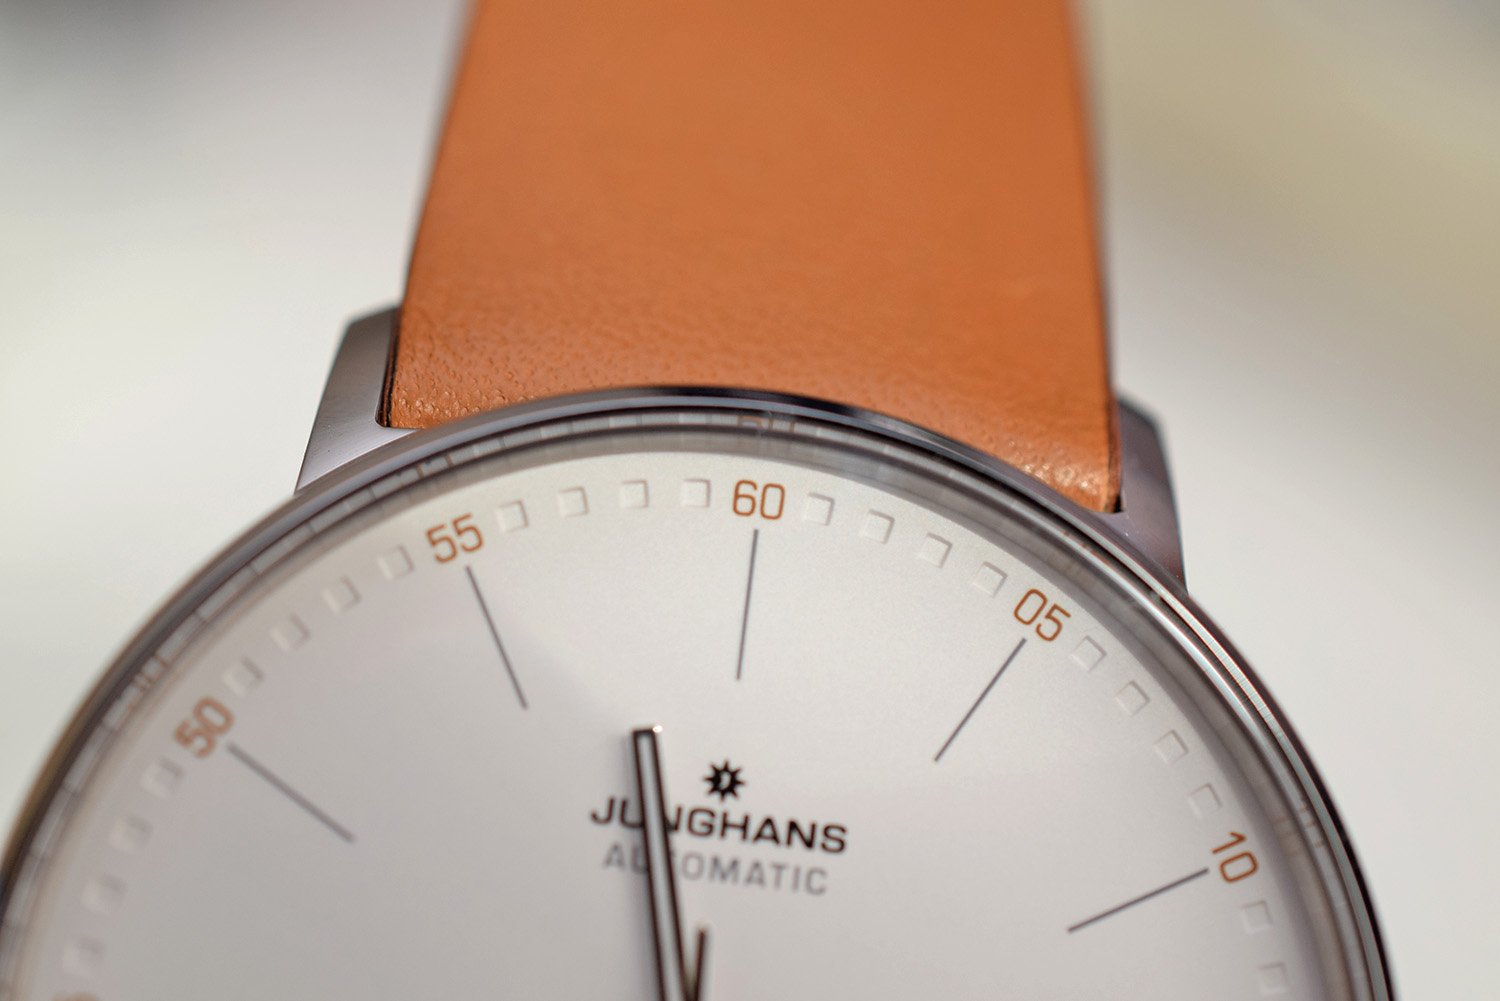 Junghans Form A Automatic Baselworld 2017